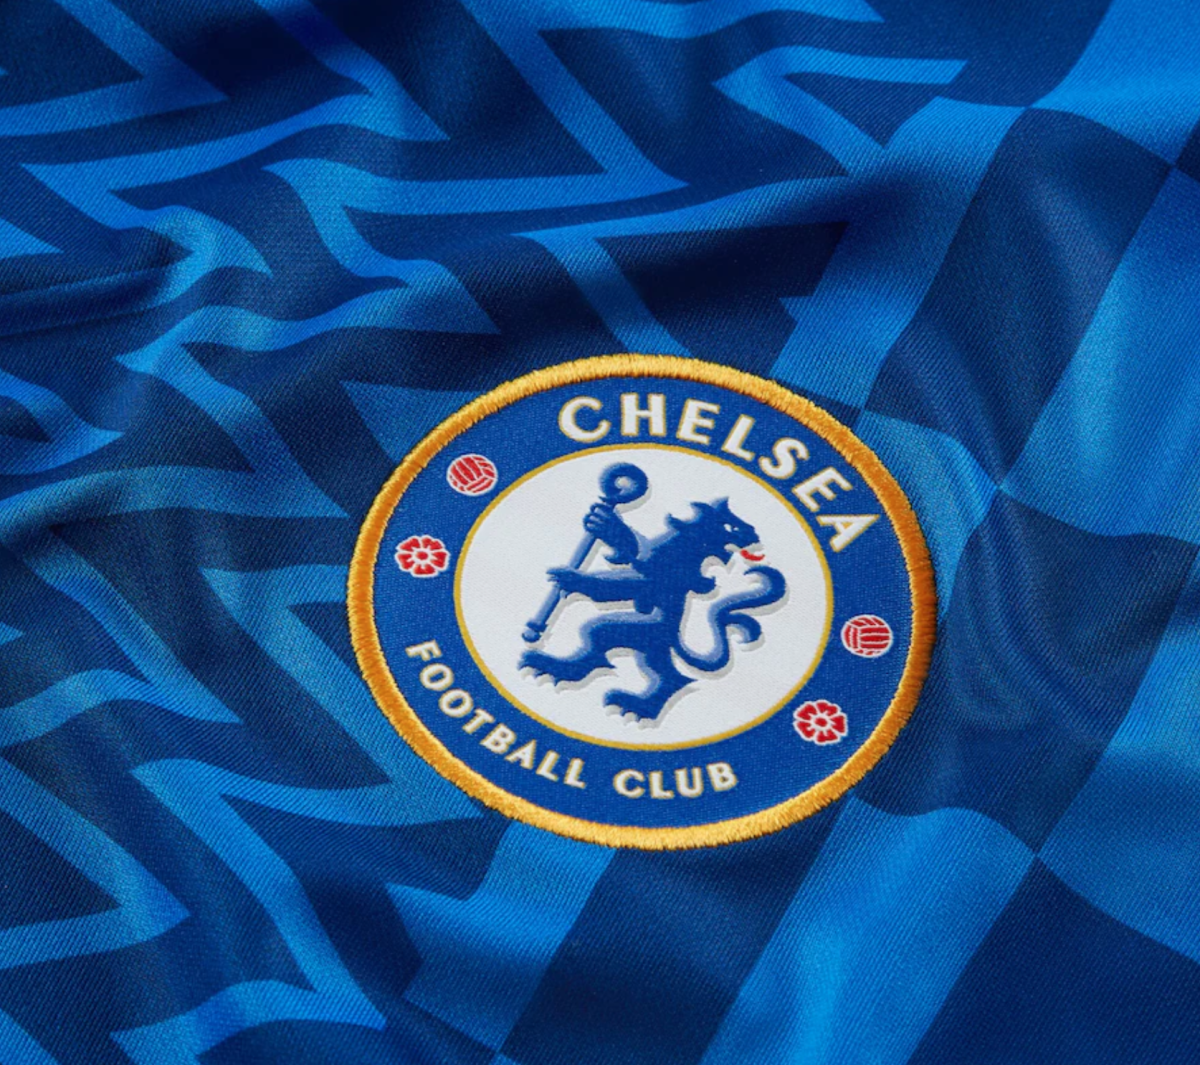 Chelsea Release New Home Kit For 2021 22 Season Illustrated Chelsea FC News, Analysis And More